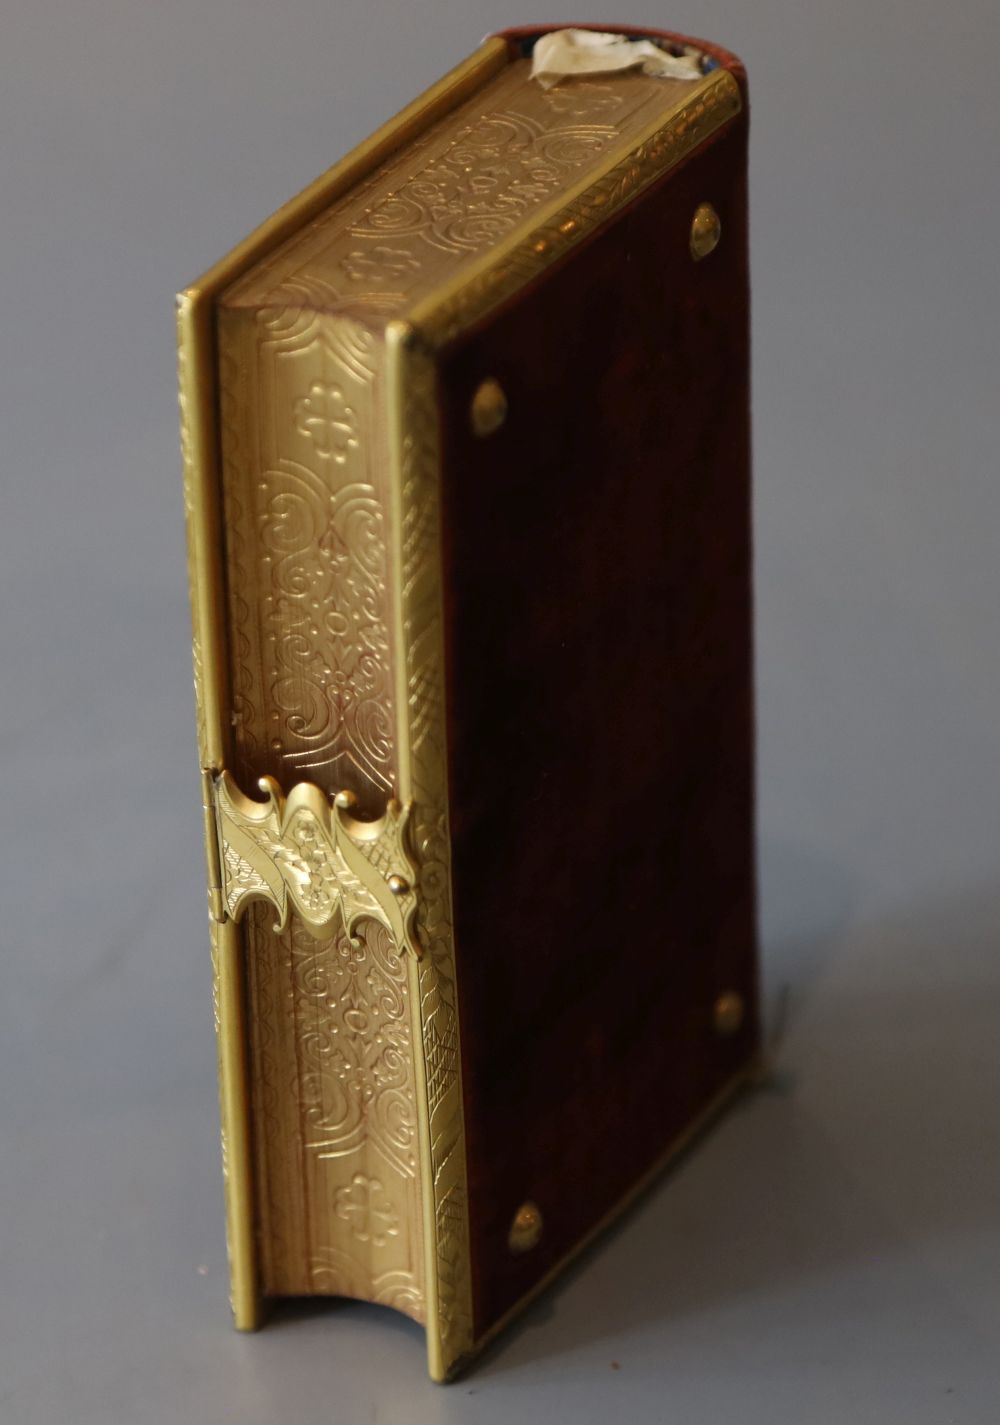 Book of Common Prayer, 12mo, contemporary red velvet, the covers with gilt brass bosses, leaf engraved borders and clasp, inner clasp i